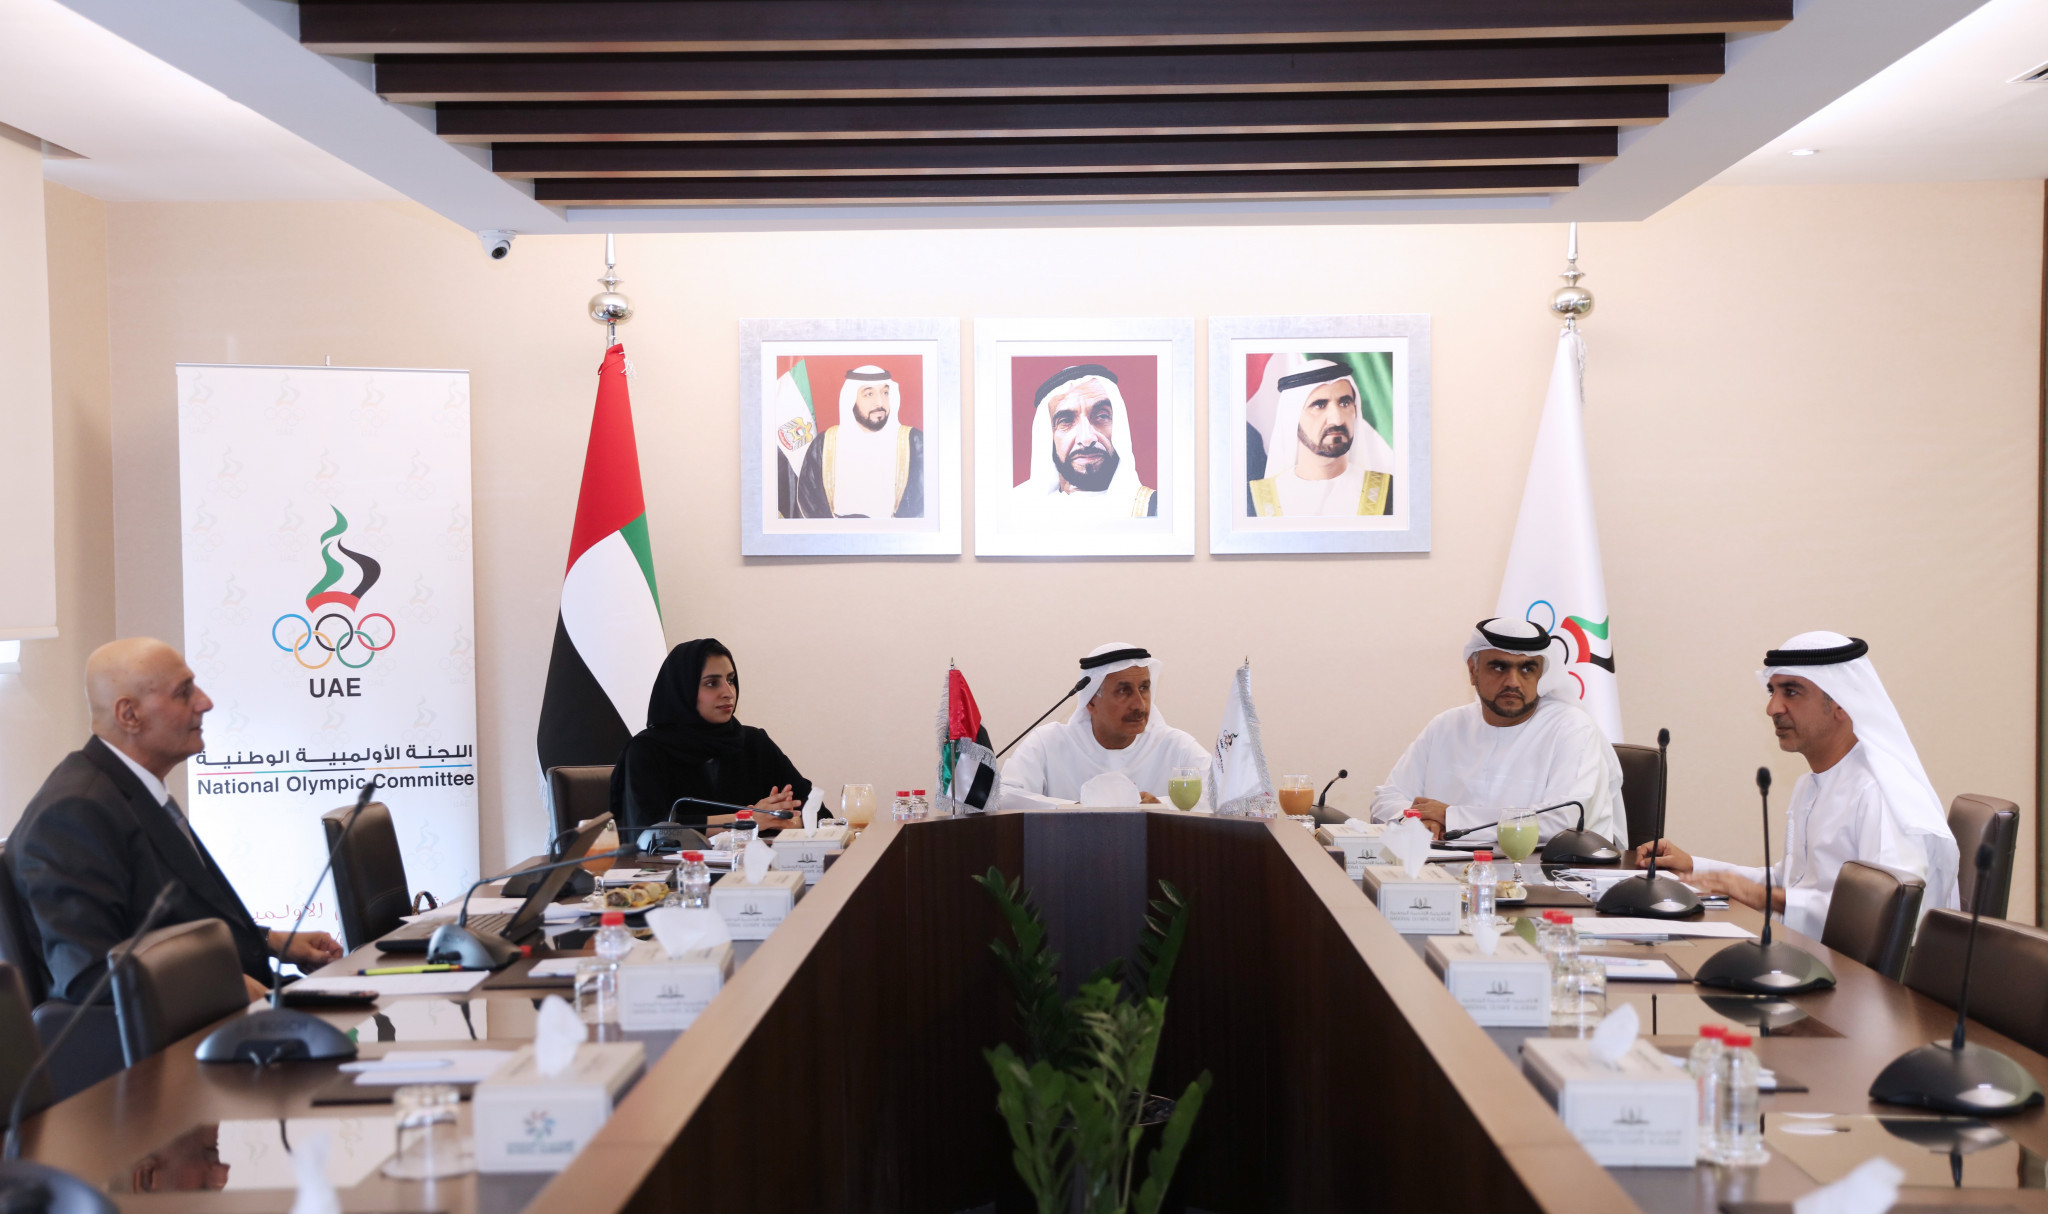 The Olympic Planning Committee of the United Arab Emirates National Olympic Committee has held discussions on all its reports and activities from recent times ©UAE NOC